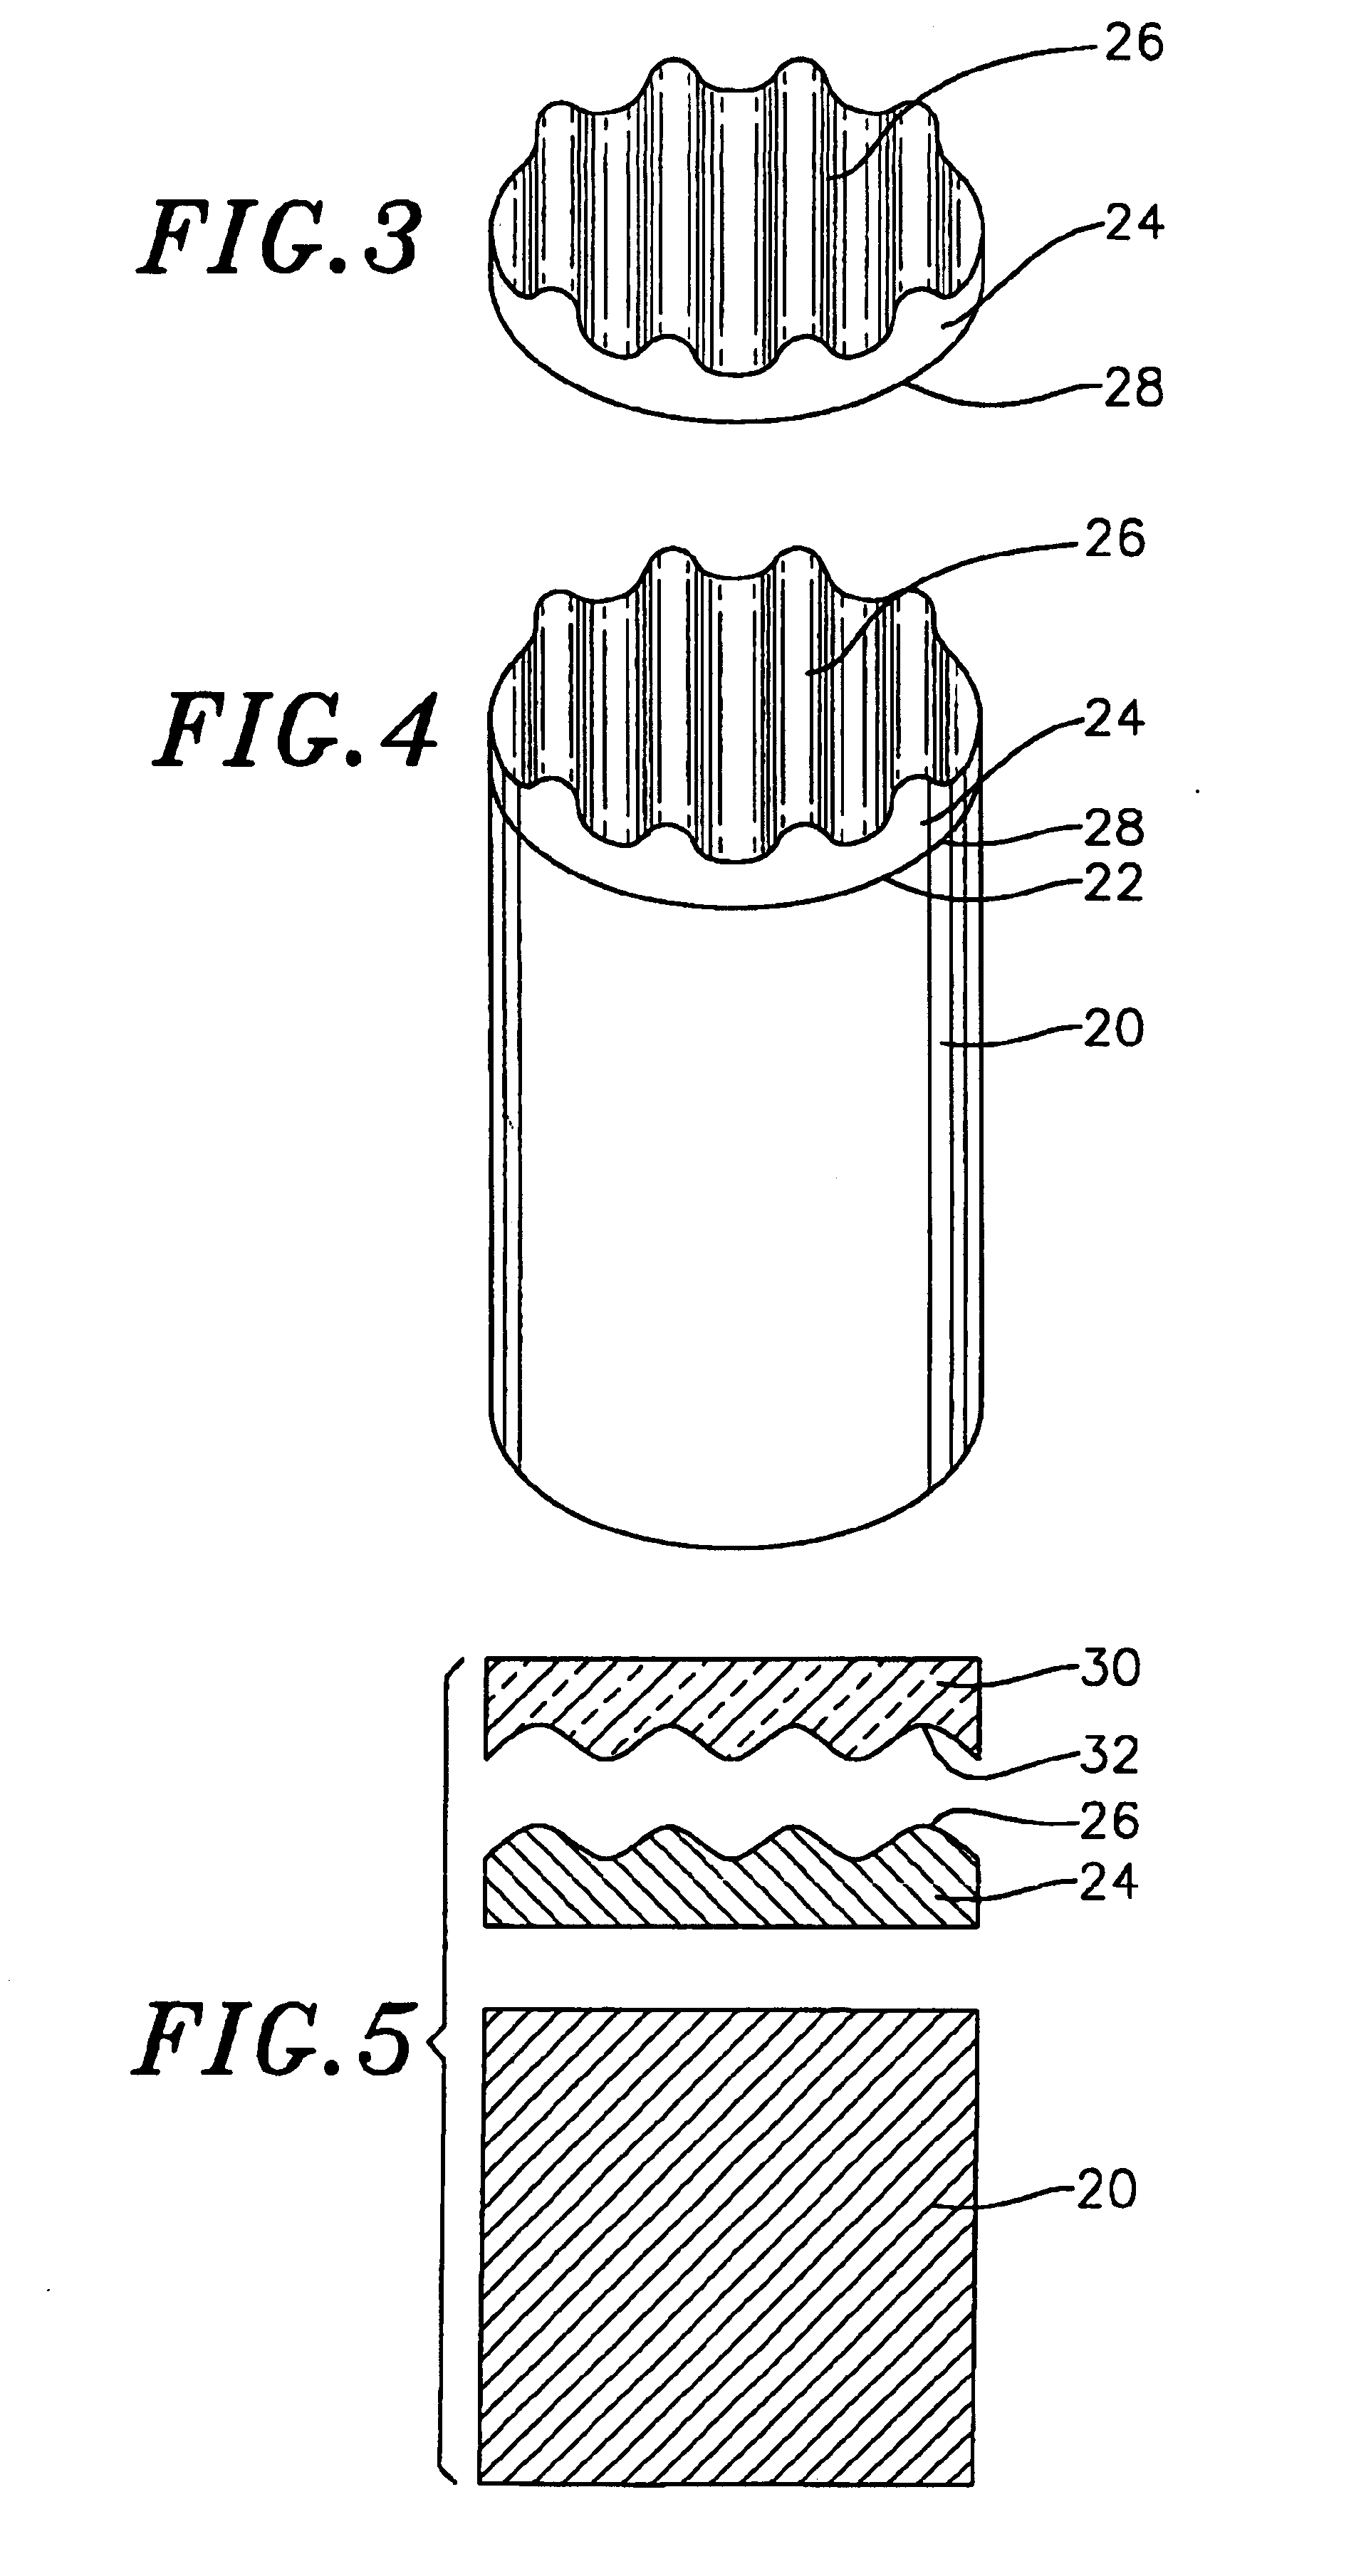 Cutting element having a substrate, a transition layer and an ultra hard material layer